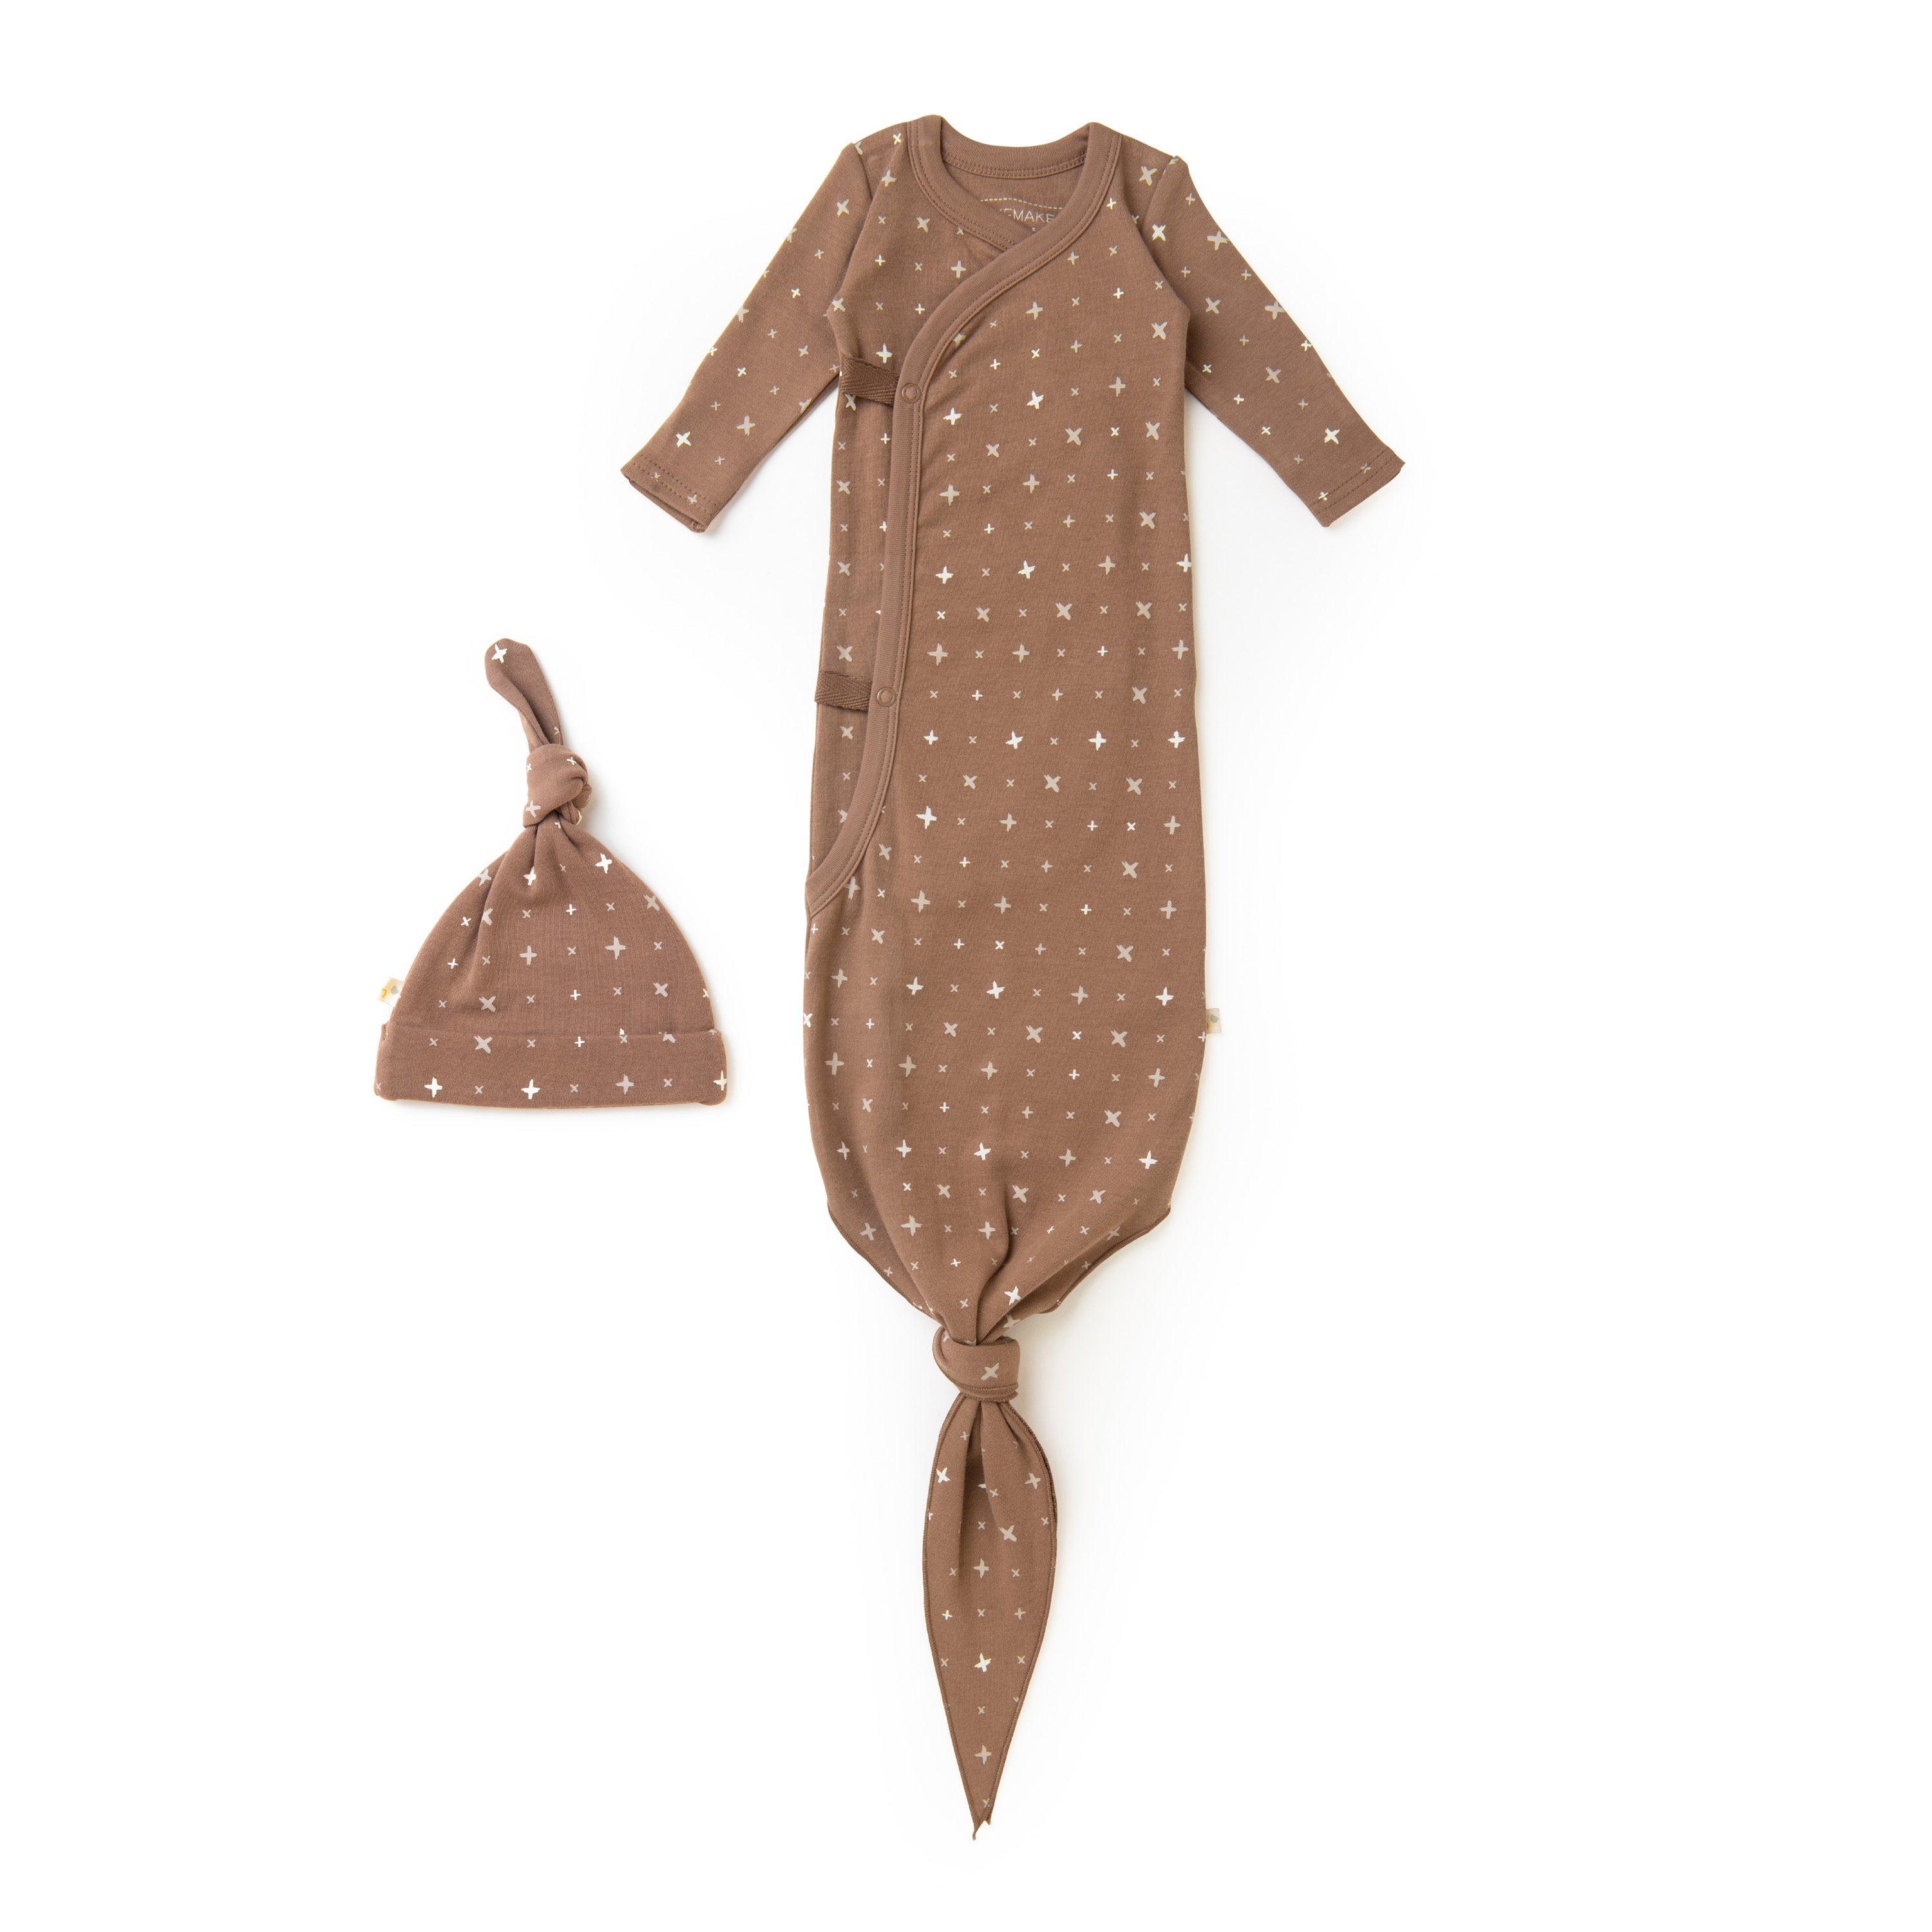 A Organic Baby Organic Kimono Knotted Sleep Gown - Sparkle with a star pattern, featuring knotted bottom design, and a matching hat, displayed on a white background.